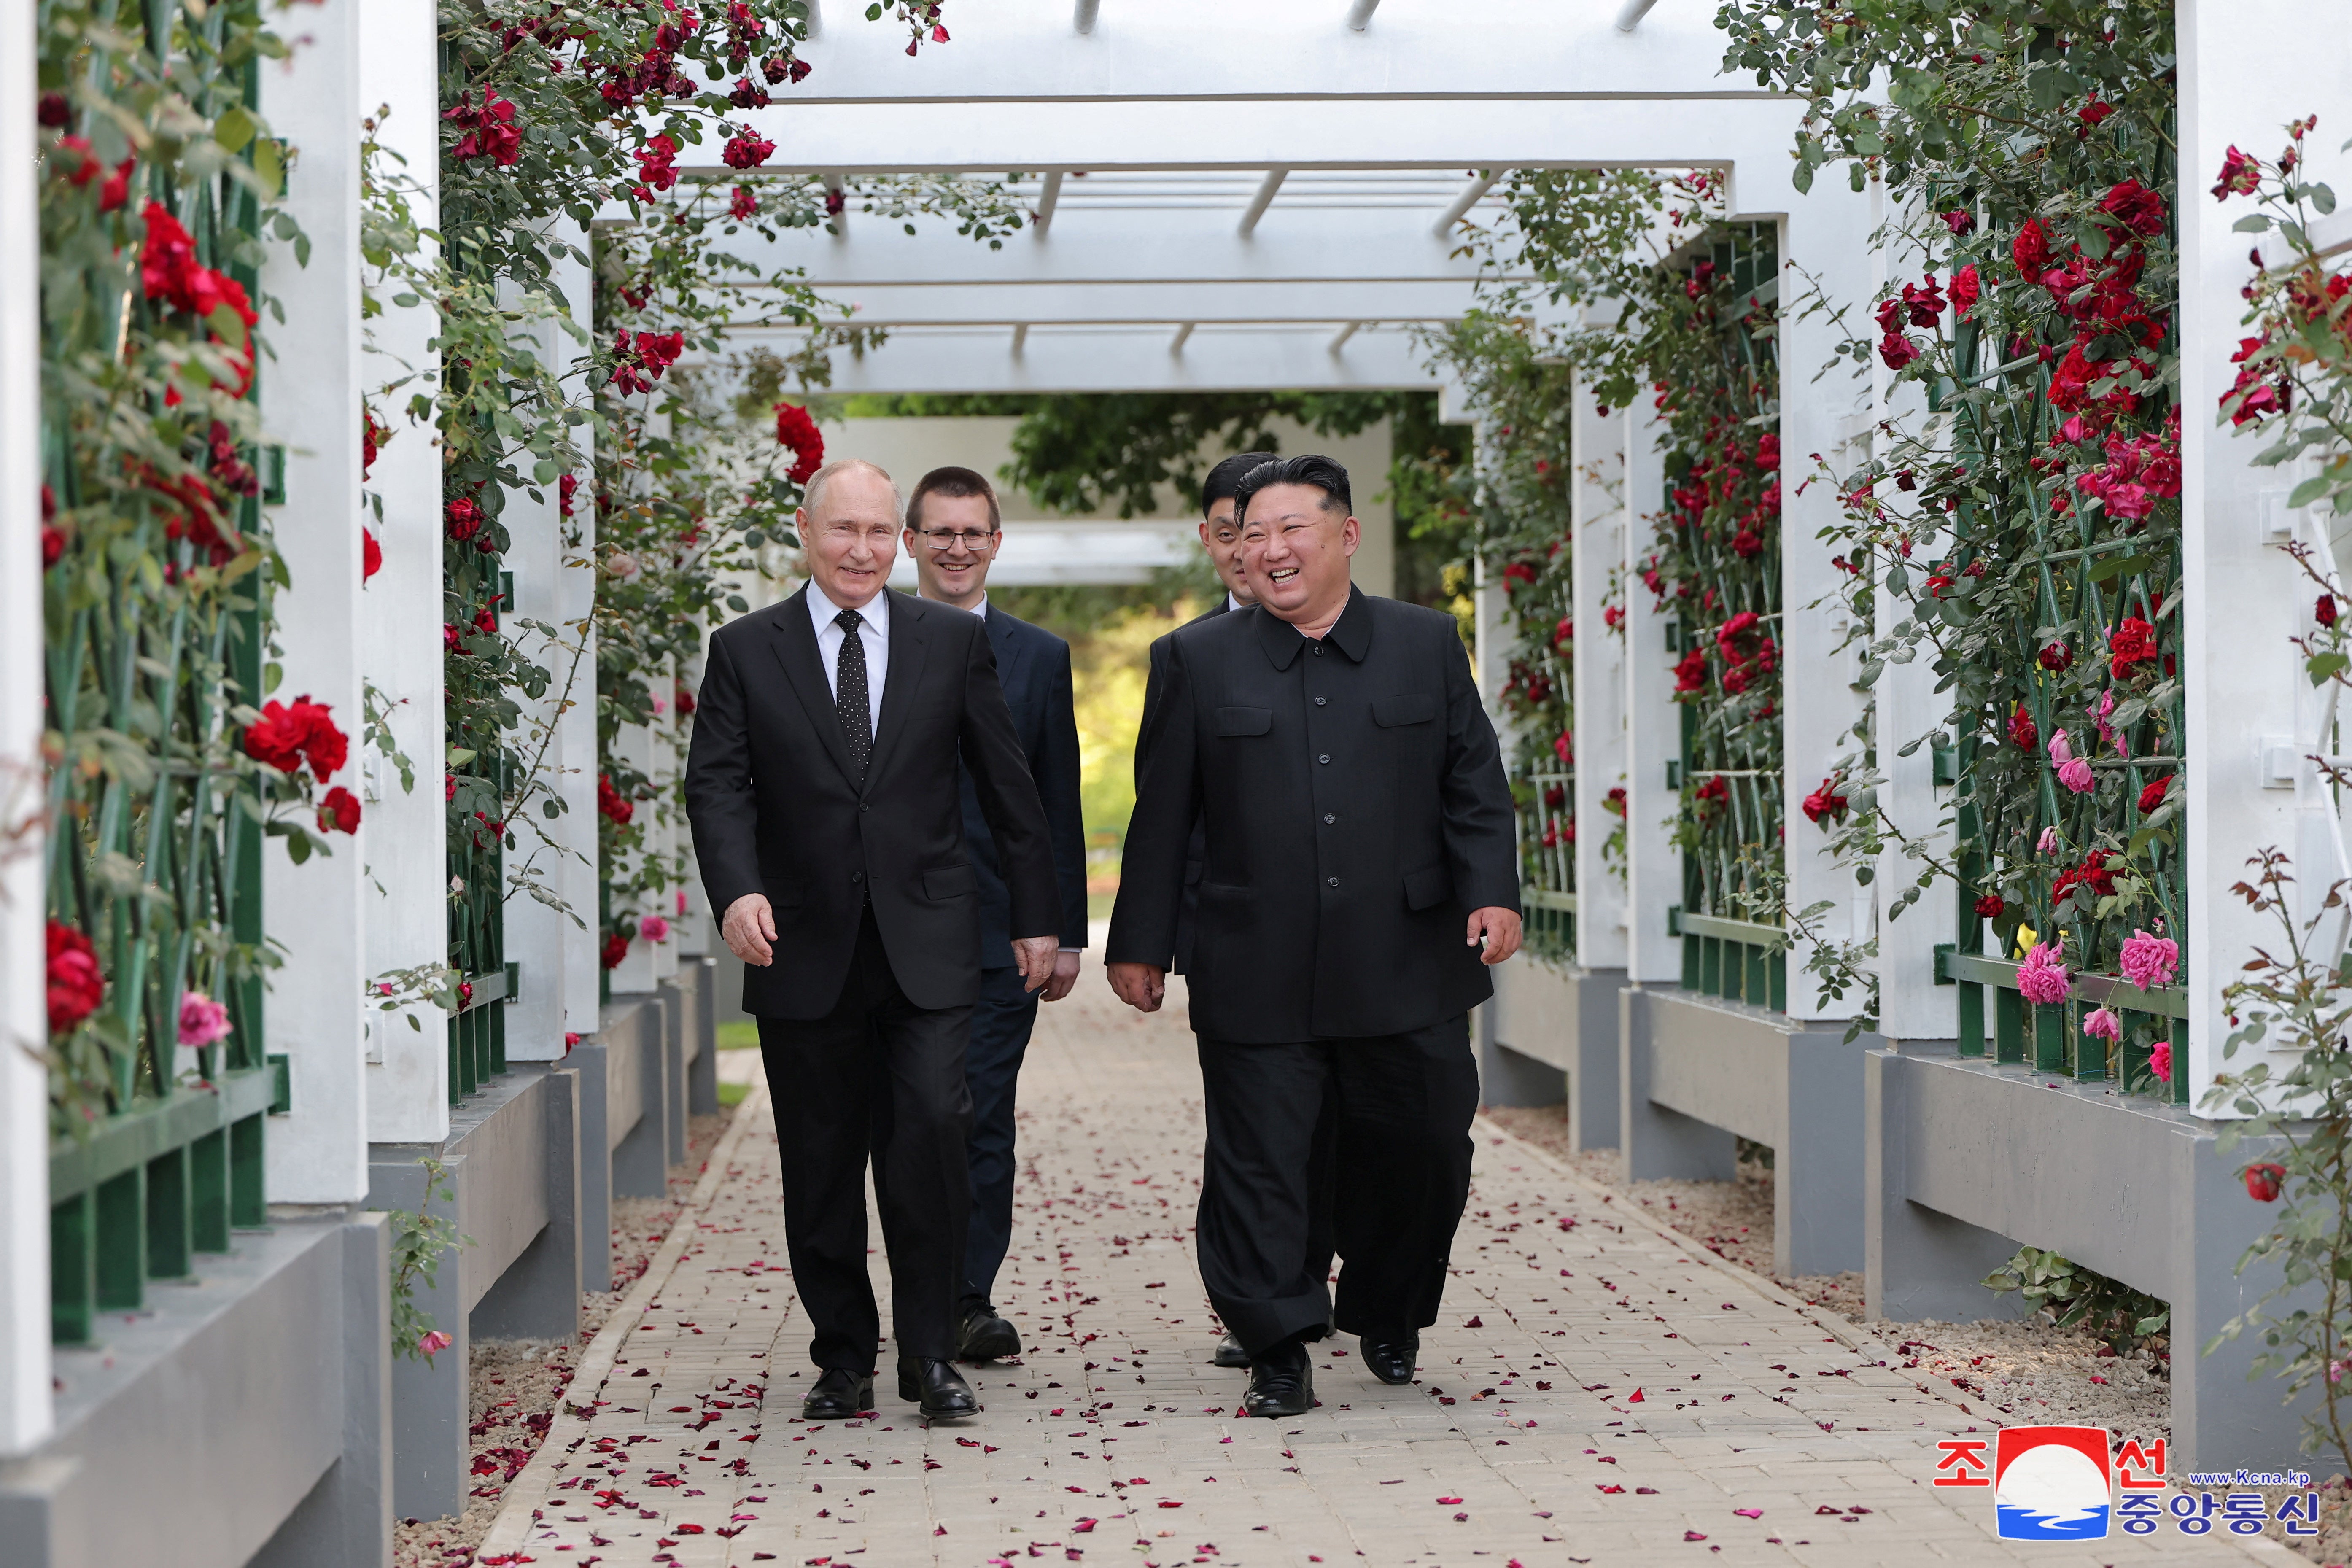 Russia’s president Vladimir Putin and North Korea’s leader Kim Jong-un react during a walk in the garden of the Kumsusan Guesthouse in Pyongyang